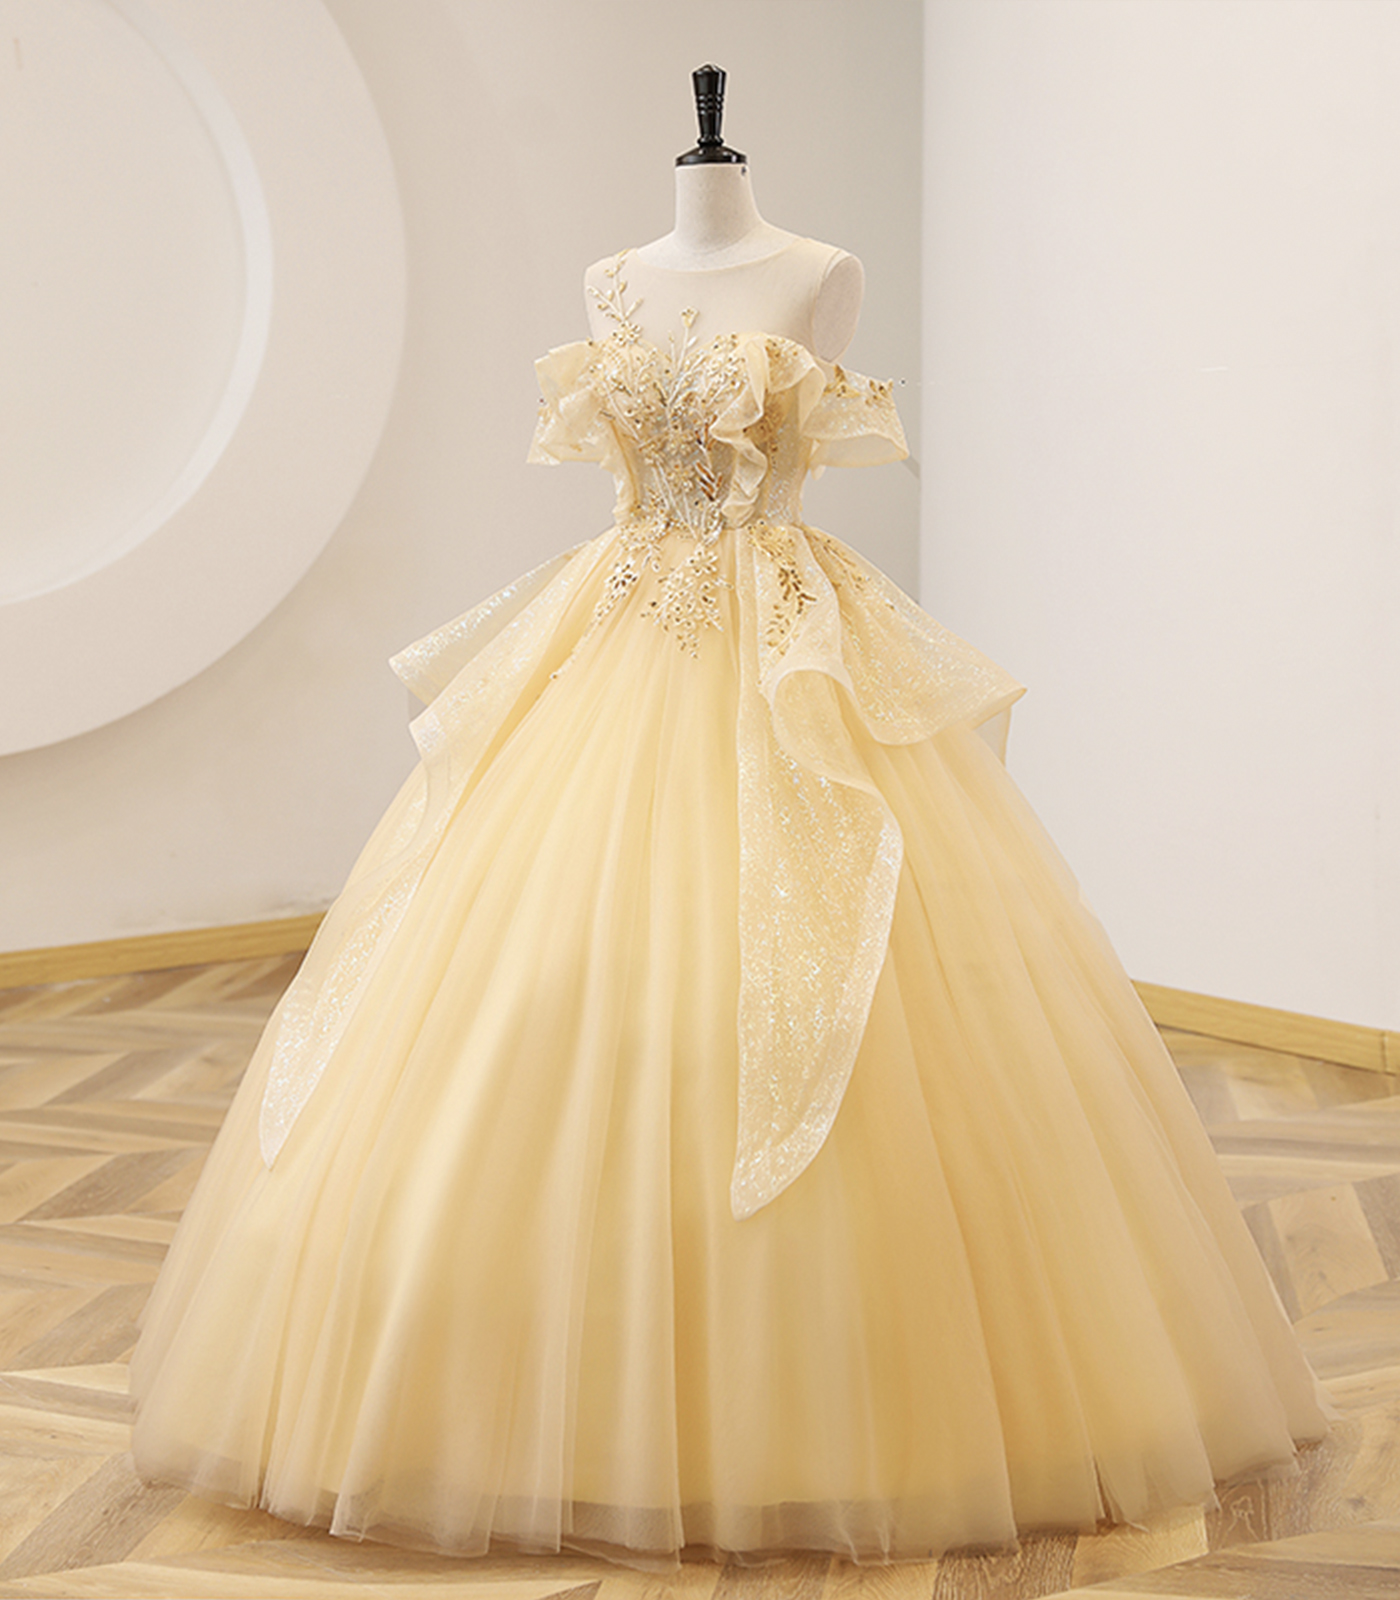 Yellow Tulle Lace Long Prom Dress, A-Line Backless Graduation Party Dr